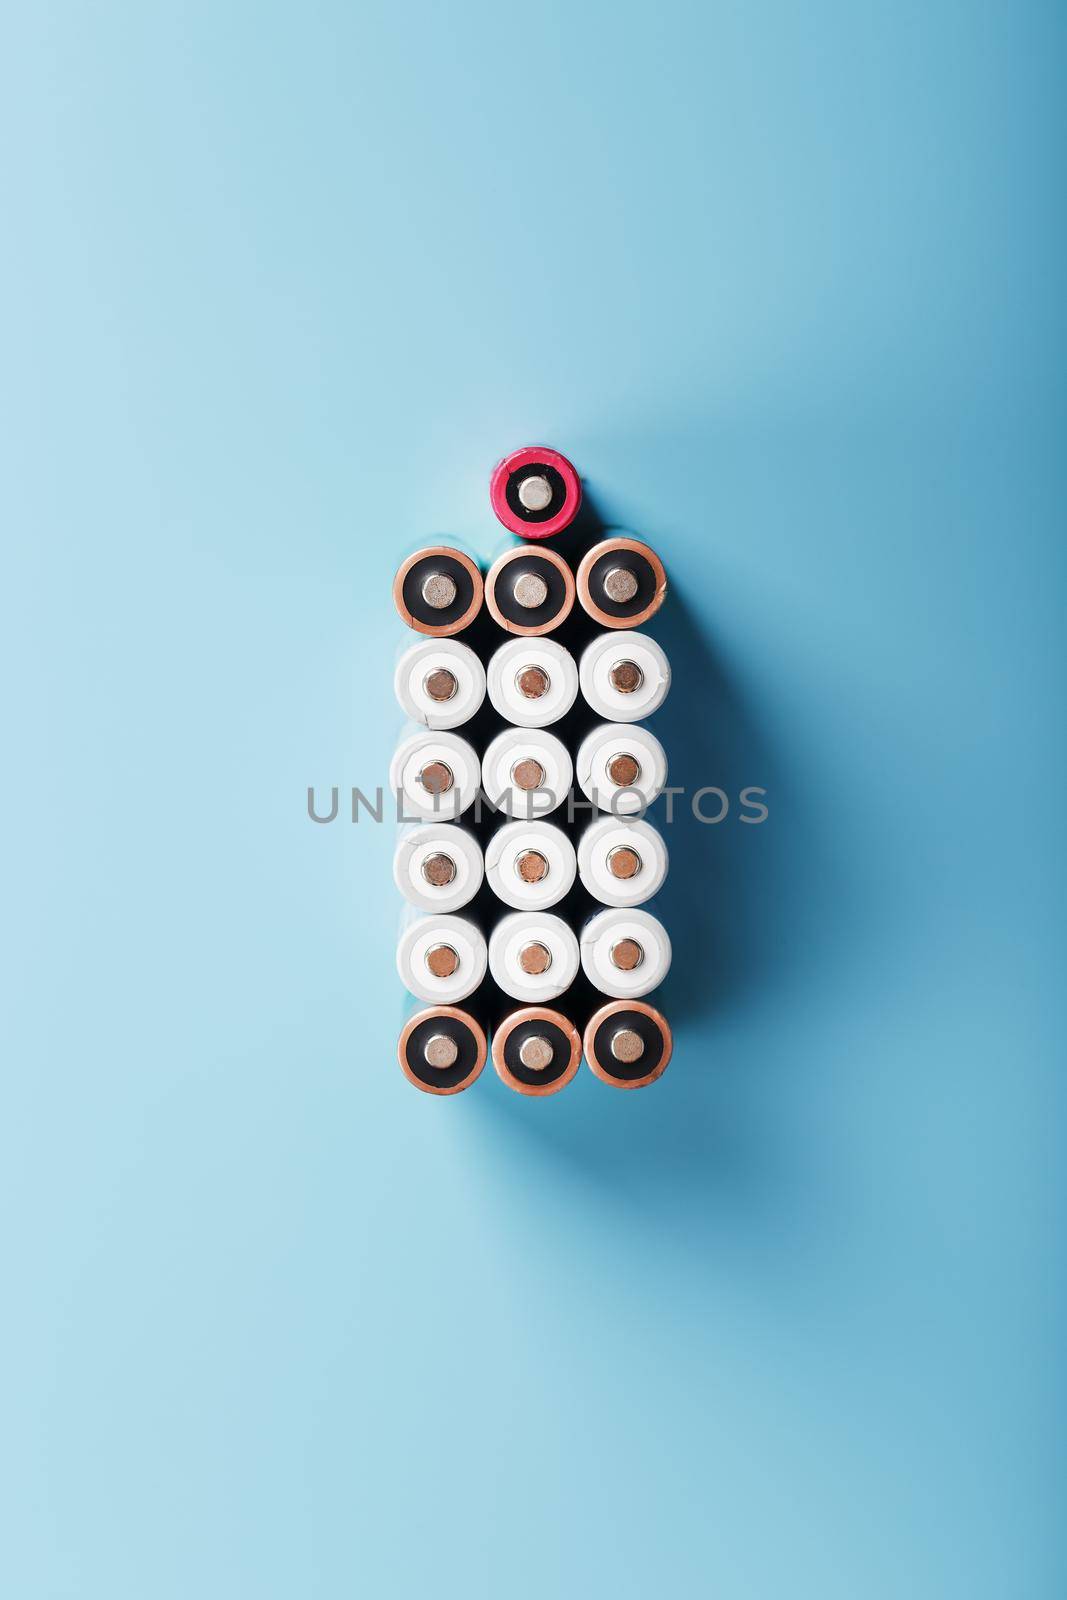 AA batteries are arranged in the form of a large battery on a blue background. by AlexGrec